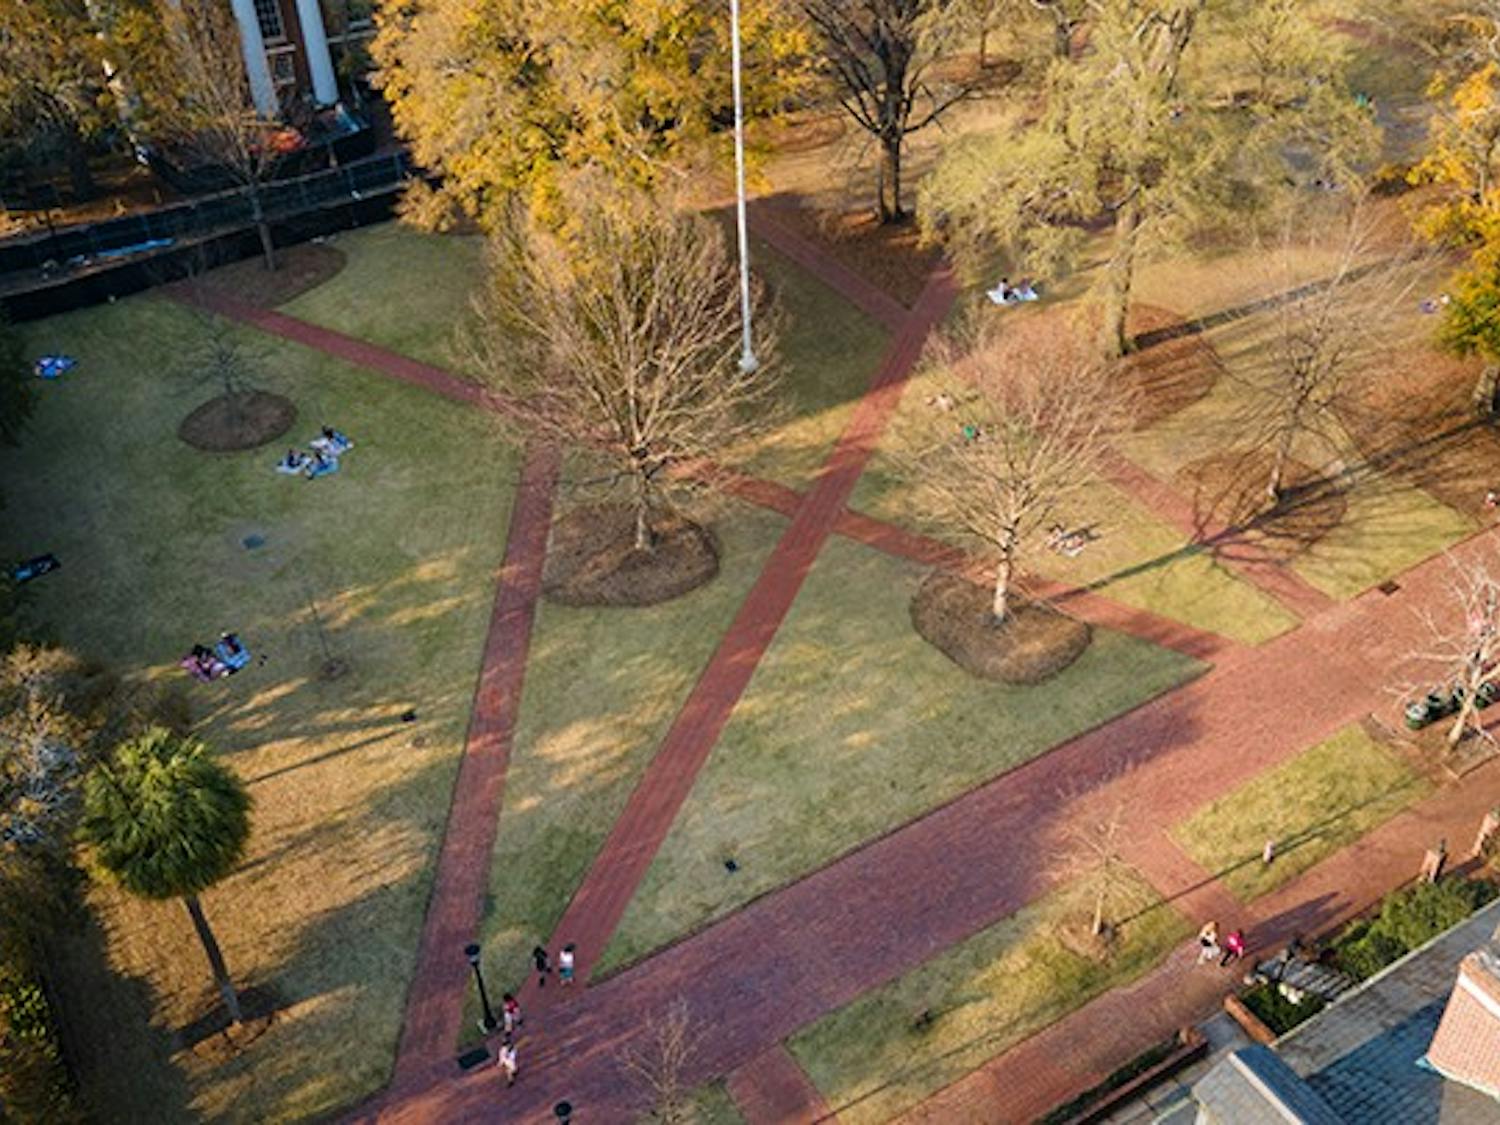 An aerial view of the Horseshoe located on the University of South Carolina's campus.